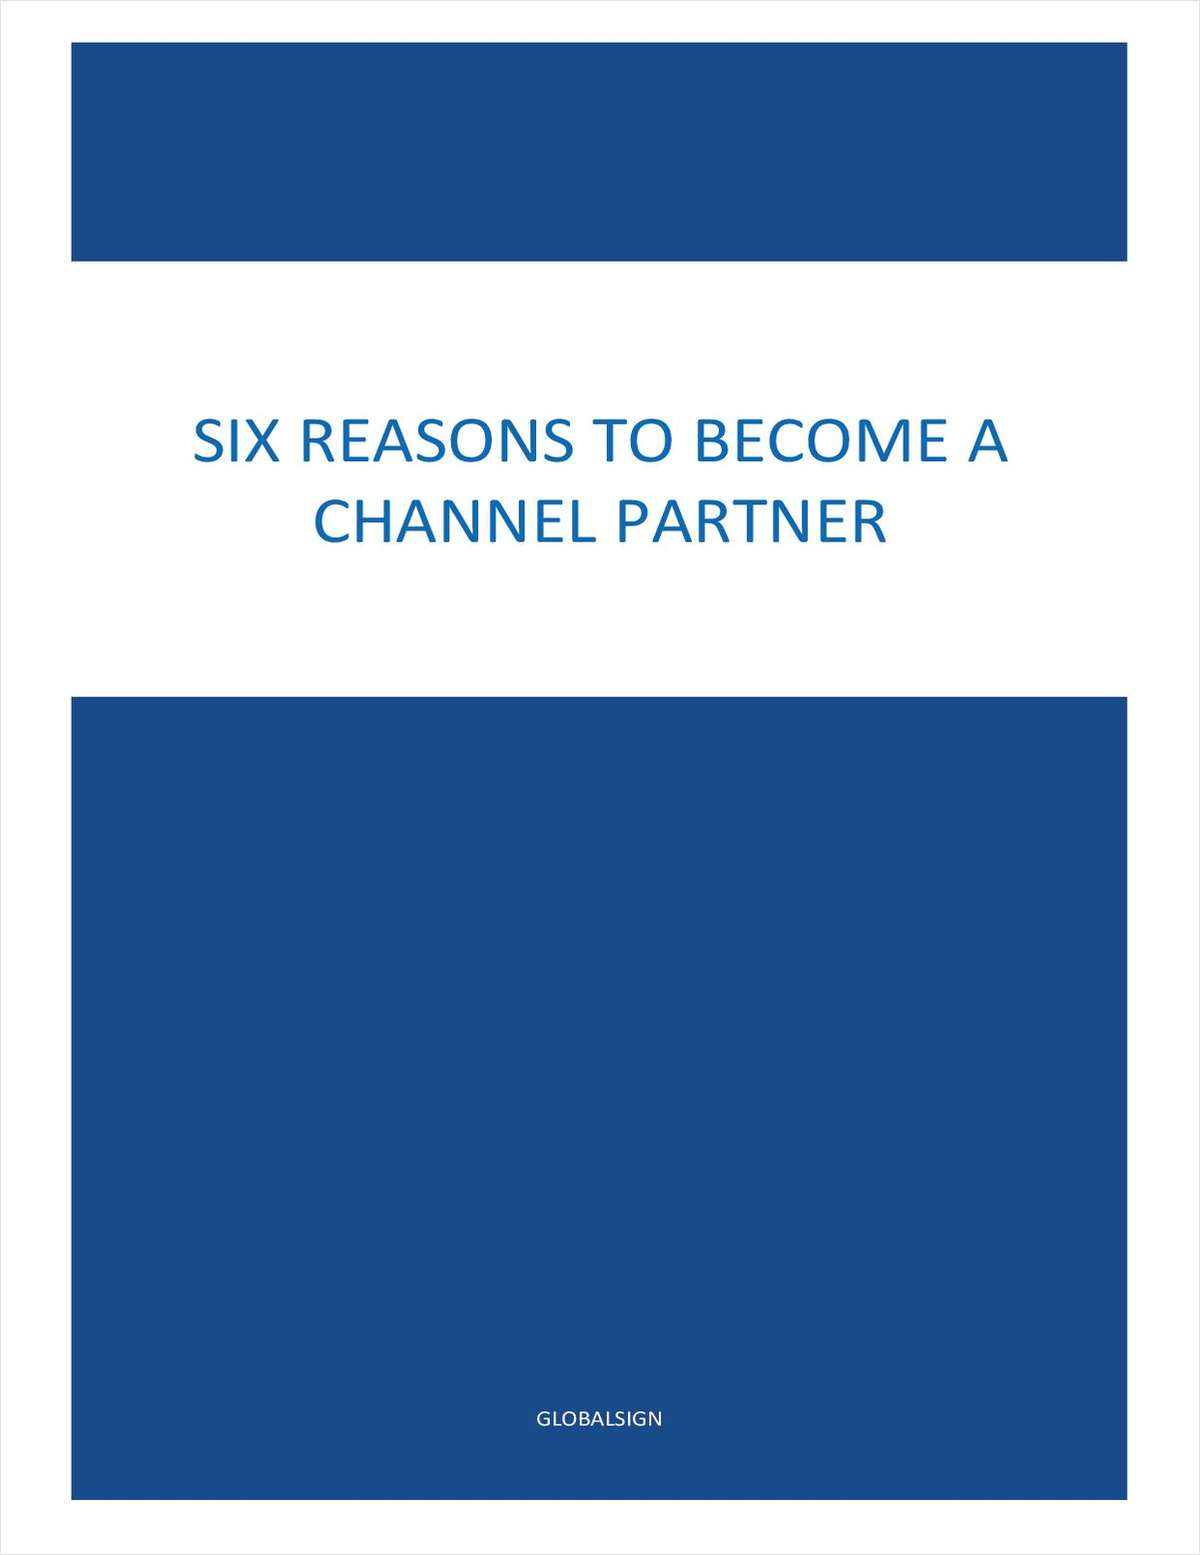 SIX REASONS TO BECOME A CHANNEL PARTNER